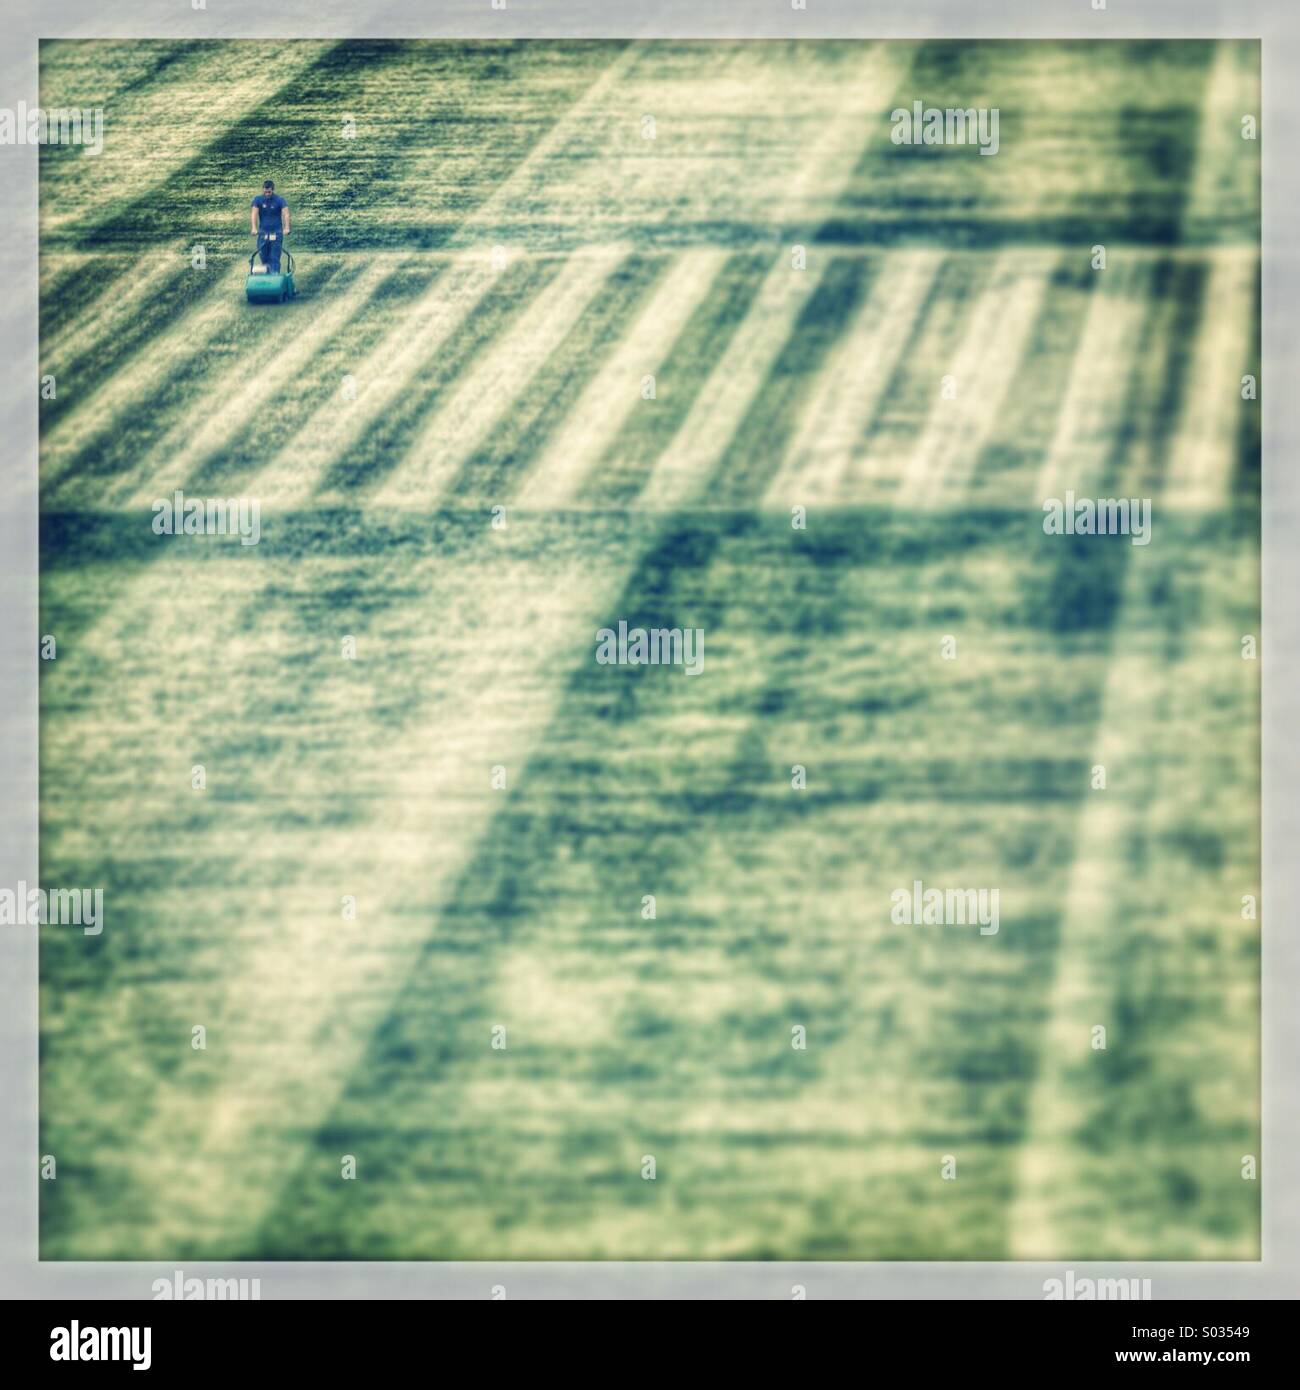 A man mows a large cricket pitch Stock Photo